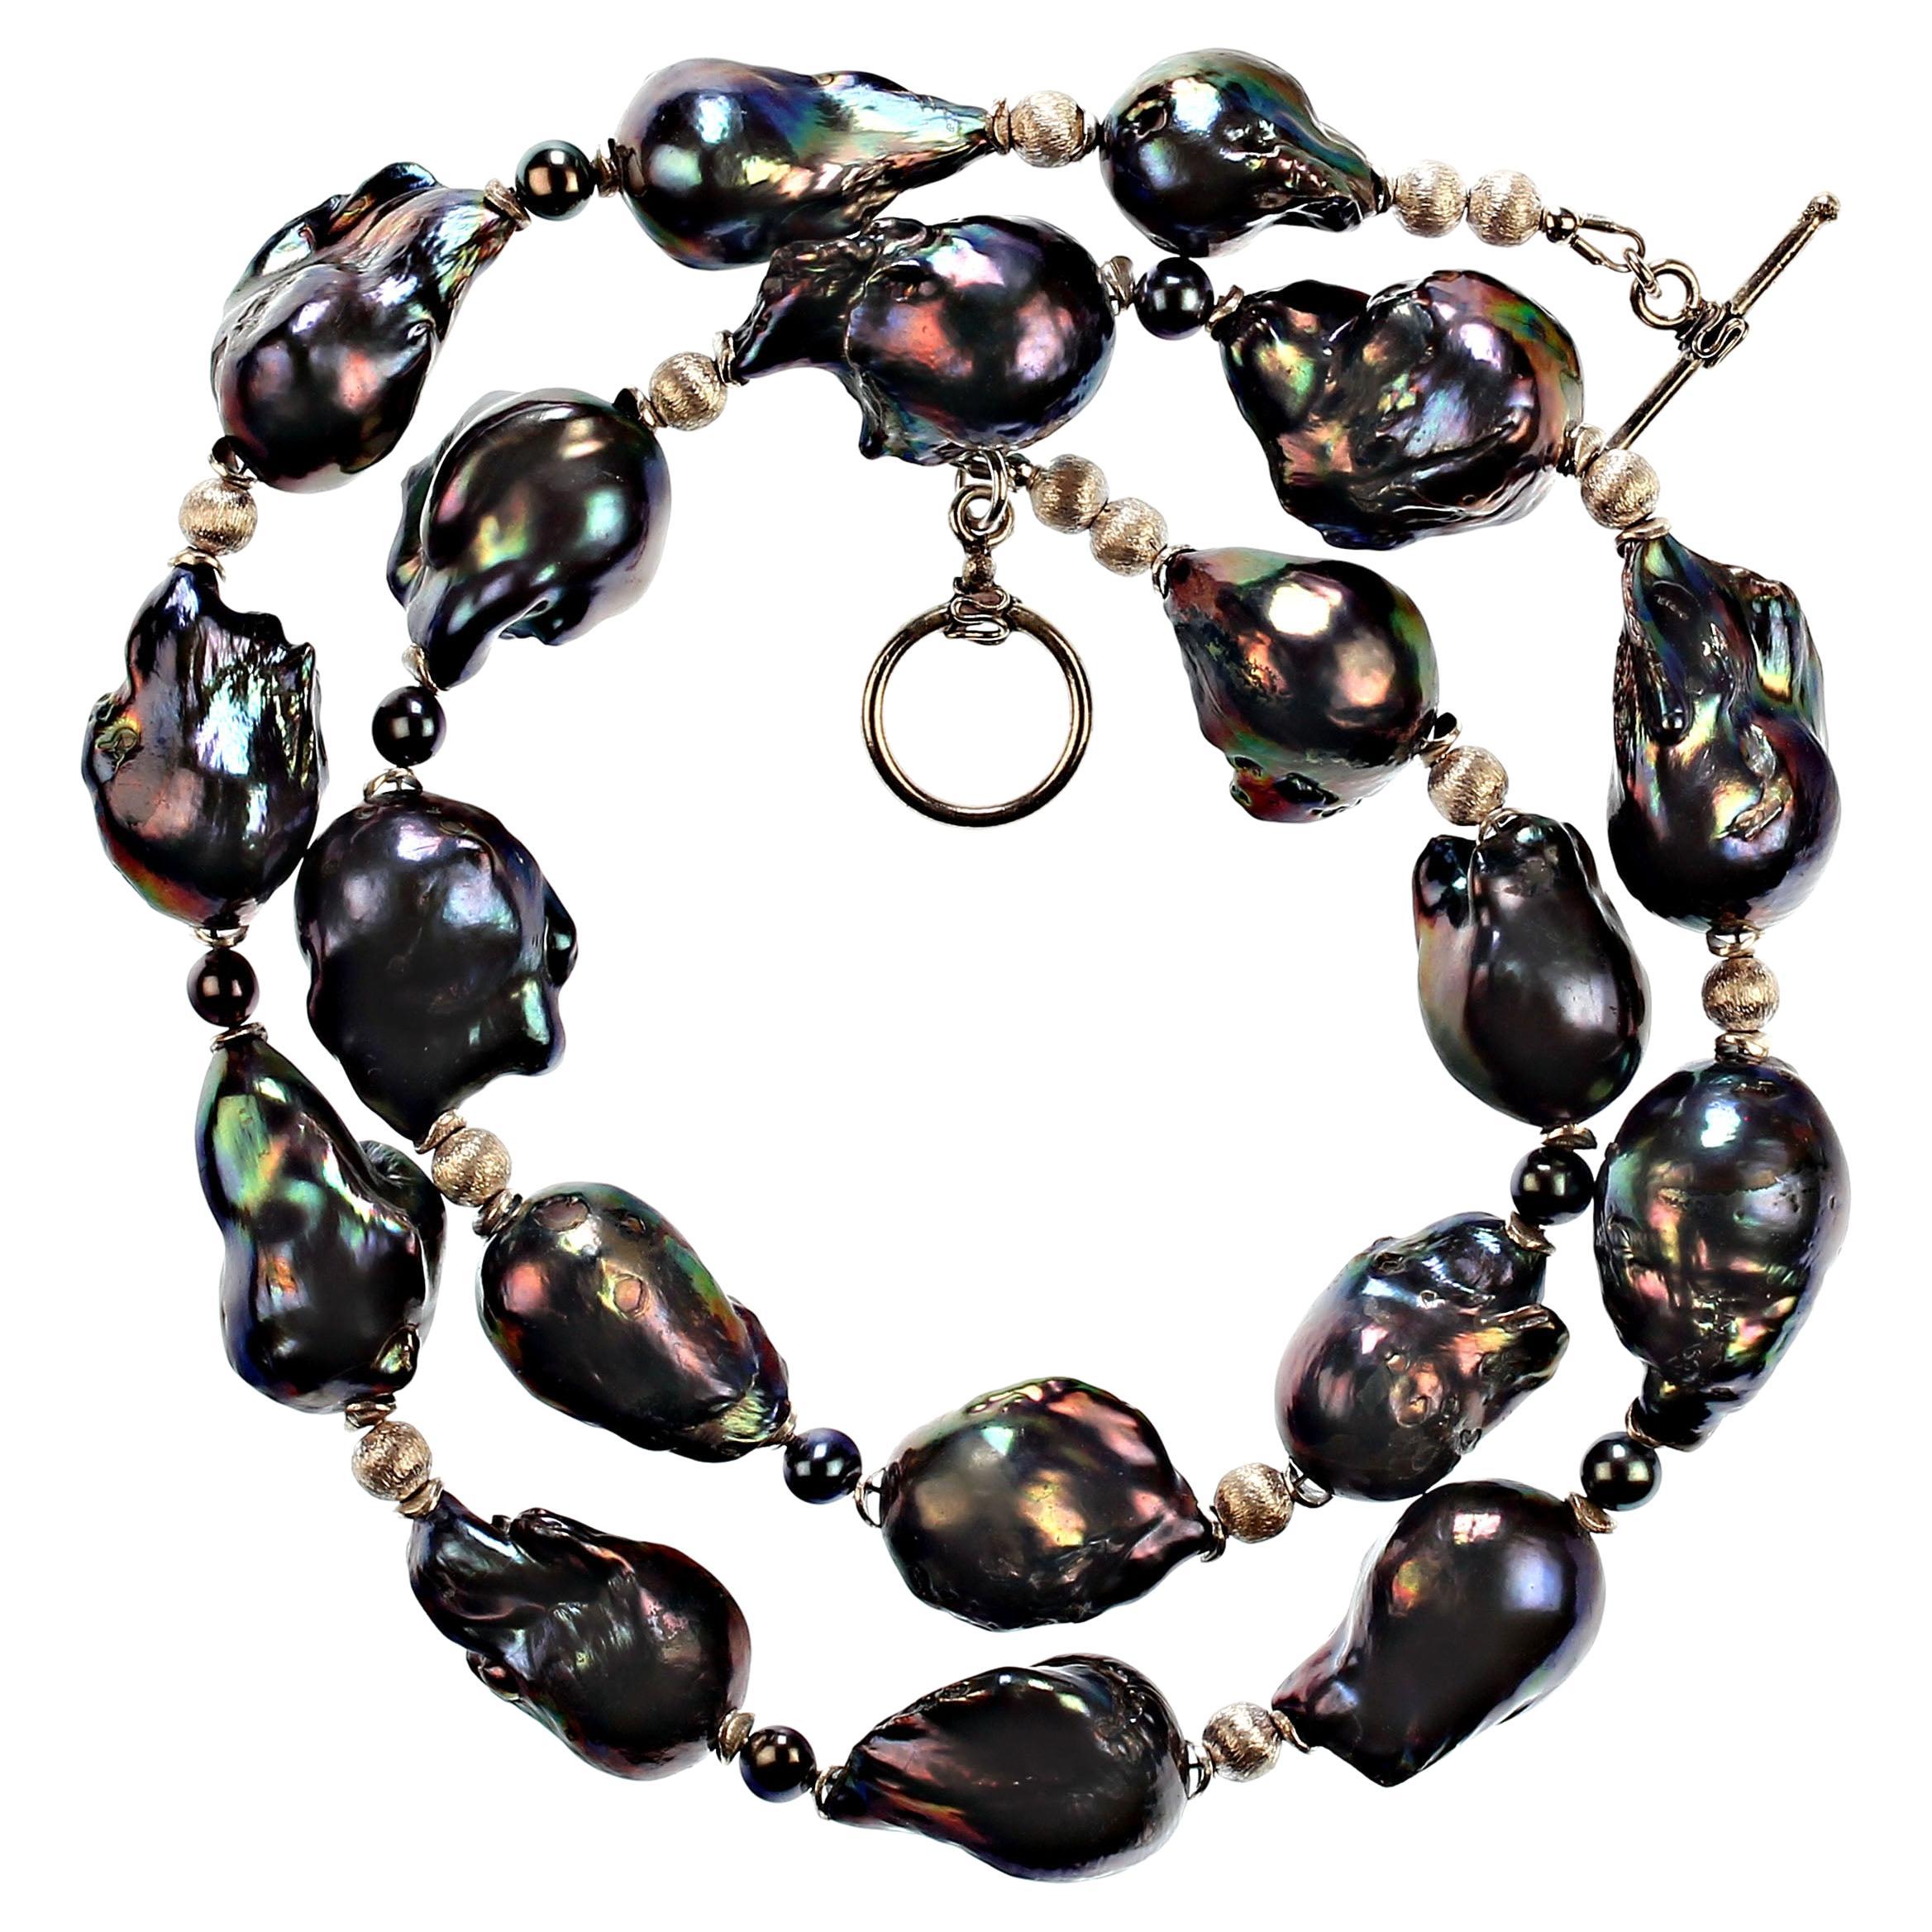 AJD 23 Inch Peacock Iridescent Fireball Pearl Necklace  June Birthstone